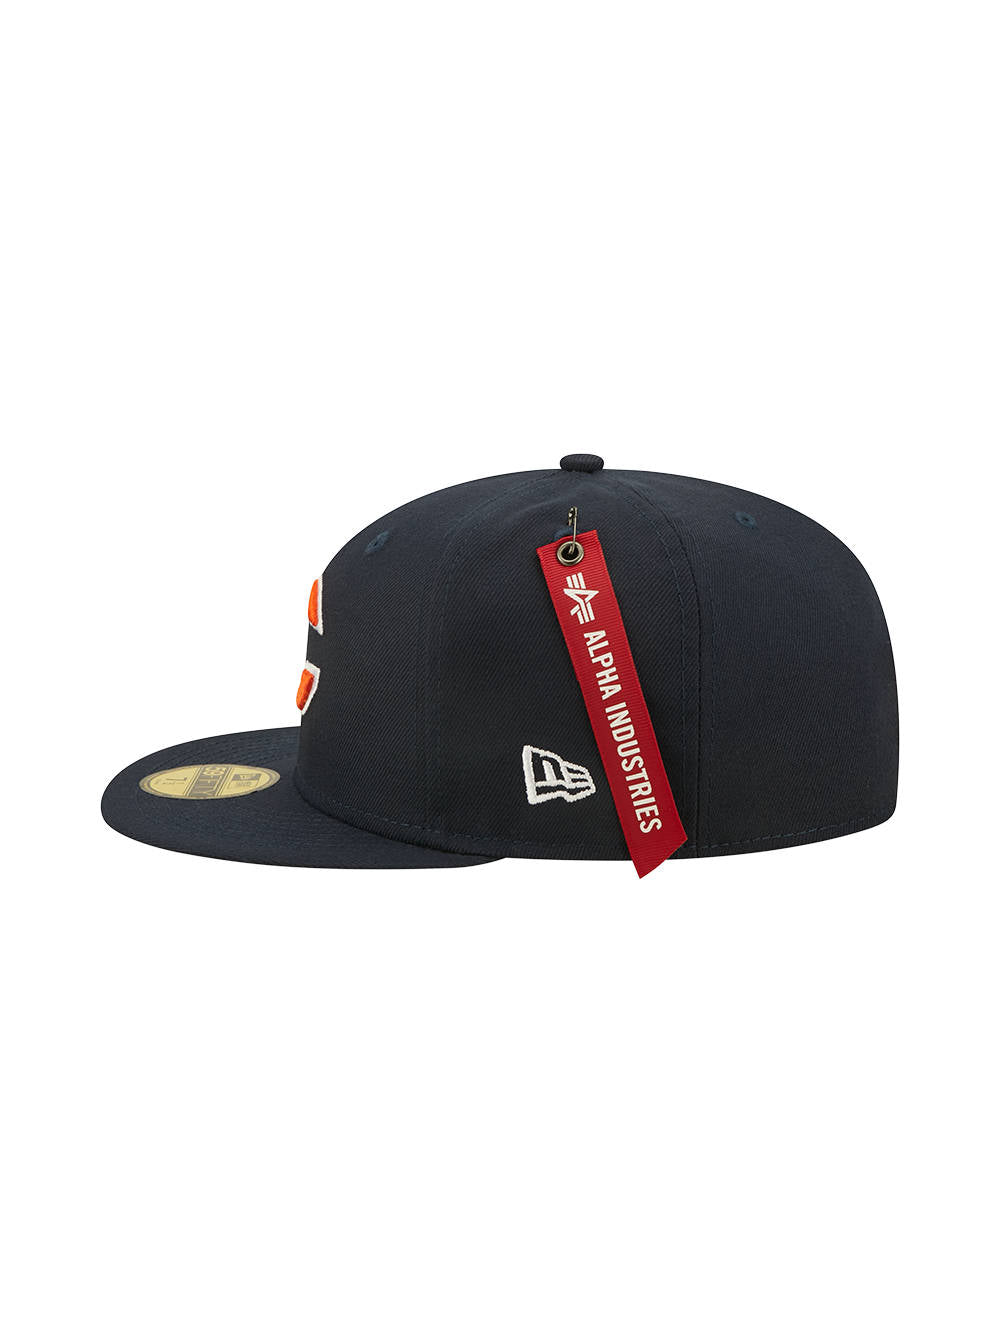 CHICAGO BEARS X ALPHA X NEW ERA 59FIFTY FITTED CAP ACCESSORY Alpha Industries 